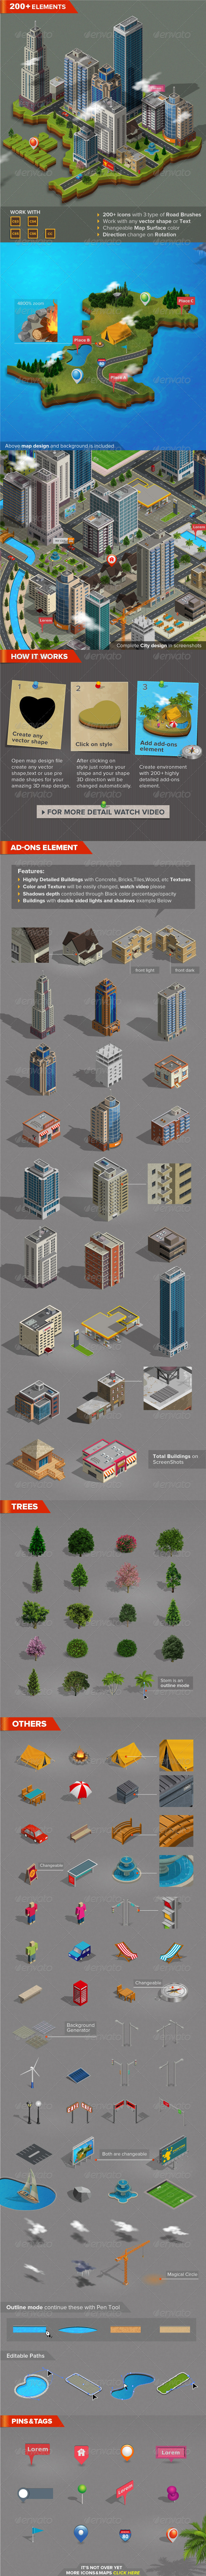 creator geographic icons infographic Isometric land Landmark map Generator buildings 3D routes continent city surface